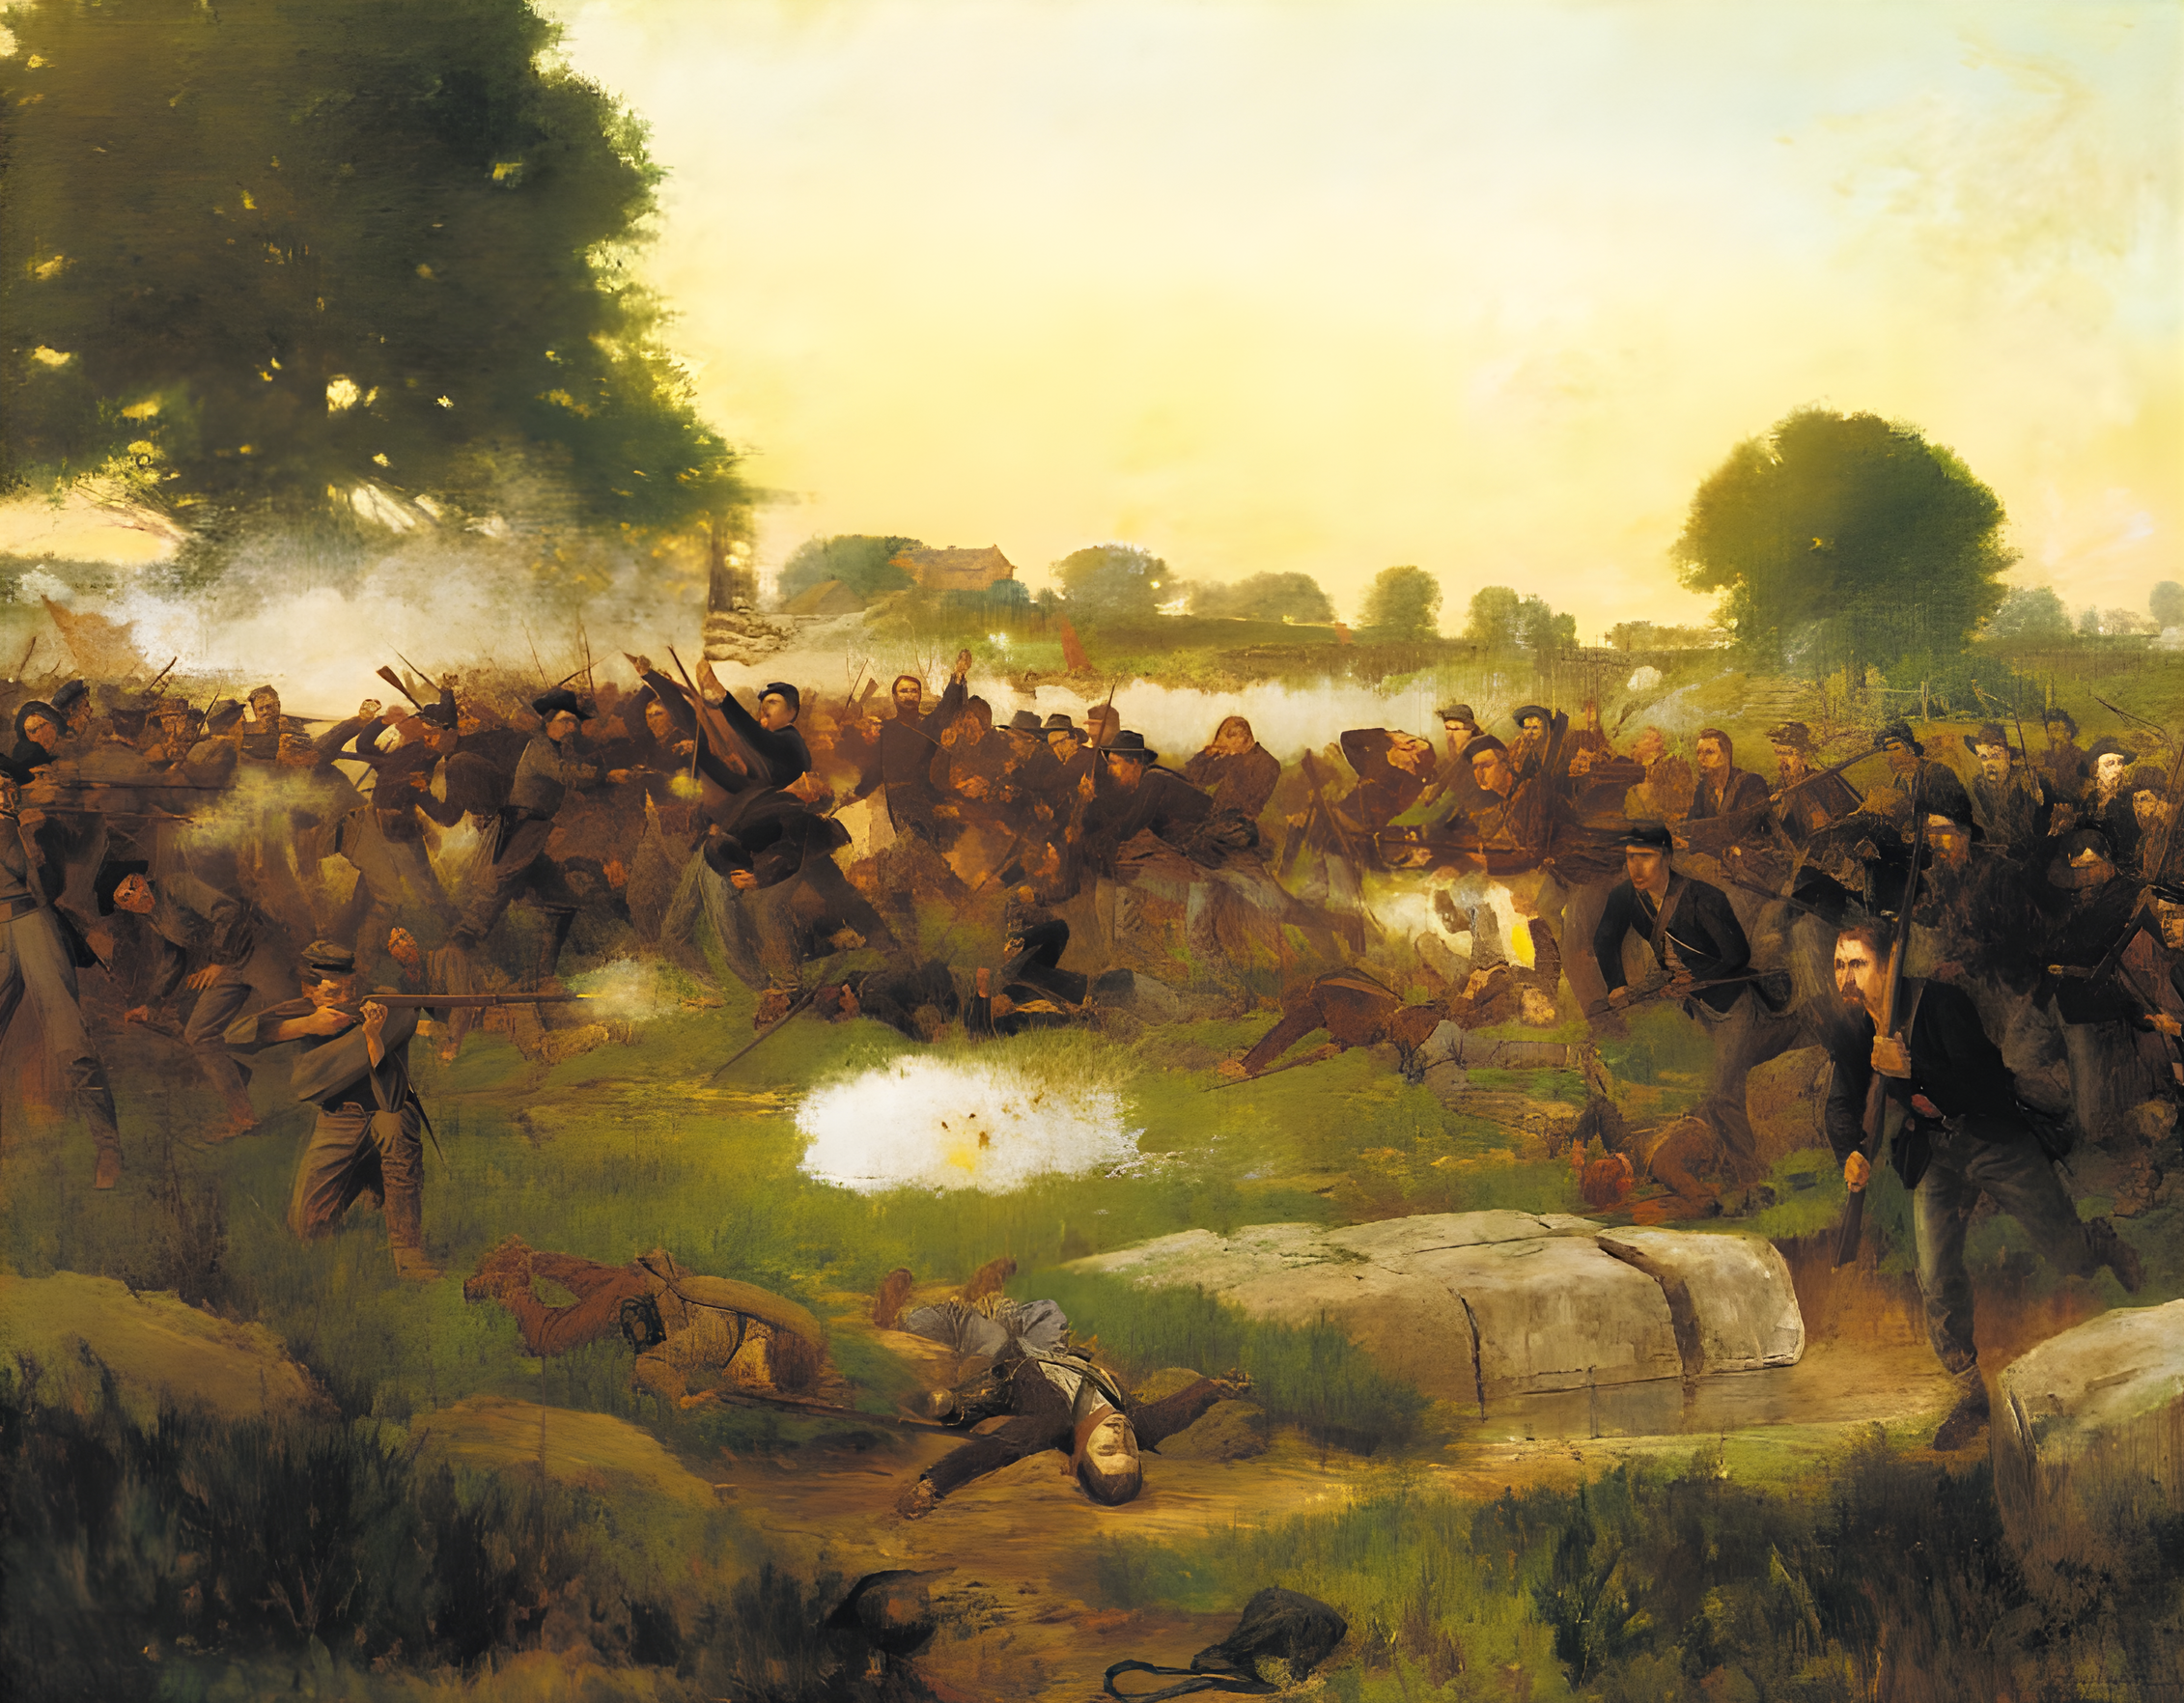 The 1st Minnesota Volunteer Infantry Regiment charges into Cadmus Wilcox’s Alabamians about to penetrate the Union line along Cemetery Ridge on the battle’s second day. Hancock ordered the suicidal charge to buy time to repair the Union position. 